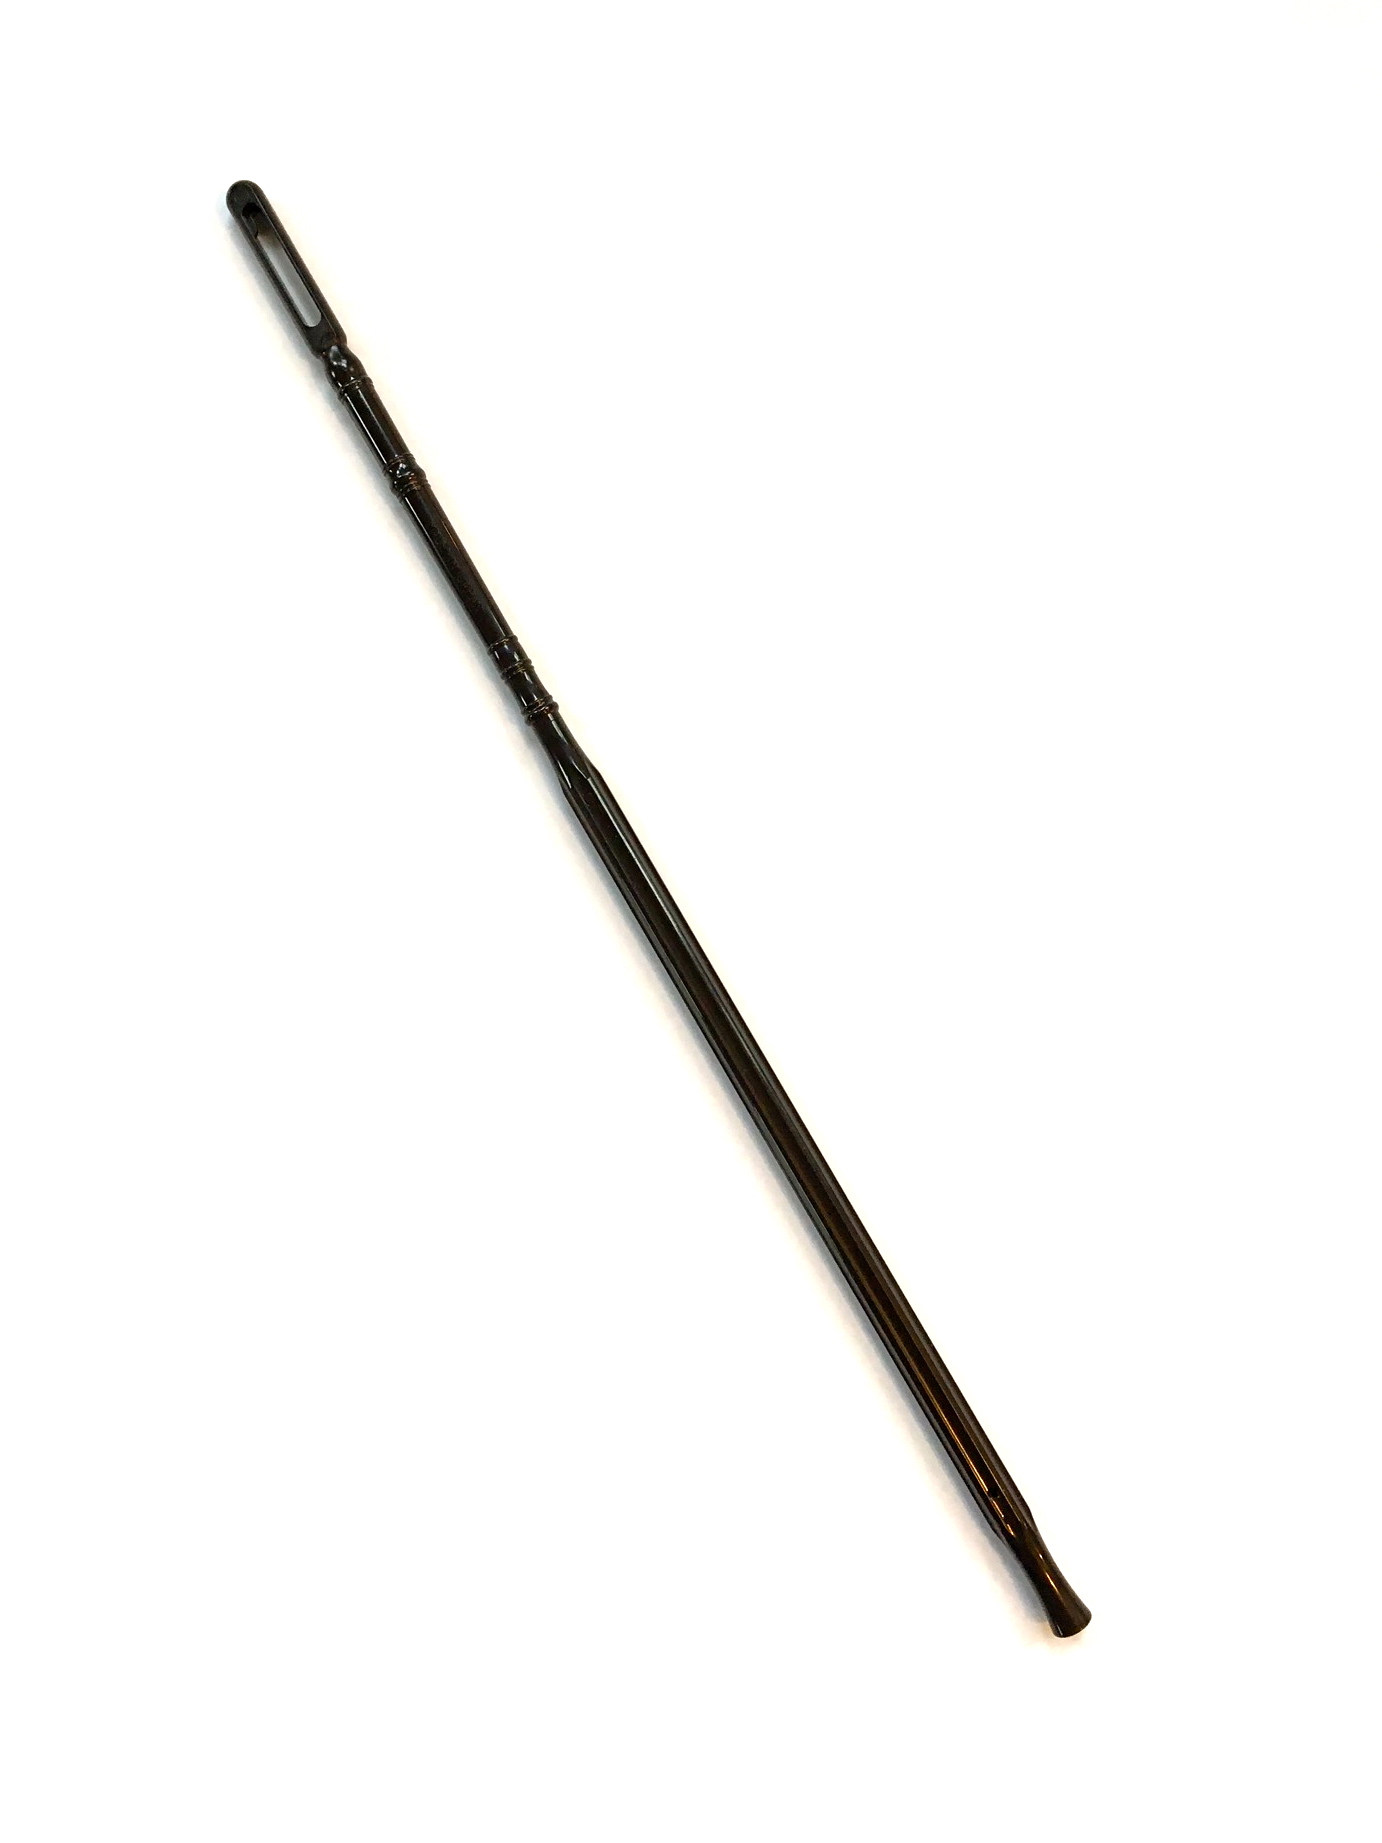 Aulos soprano recorder cleaning rod